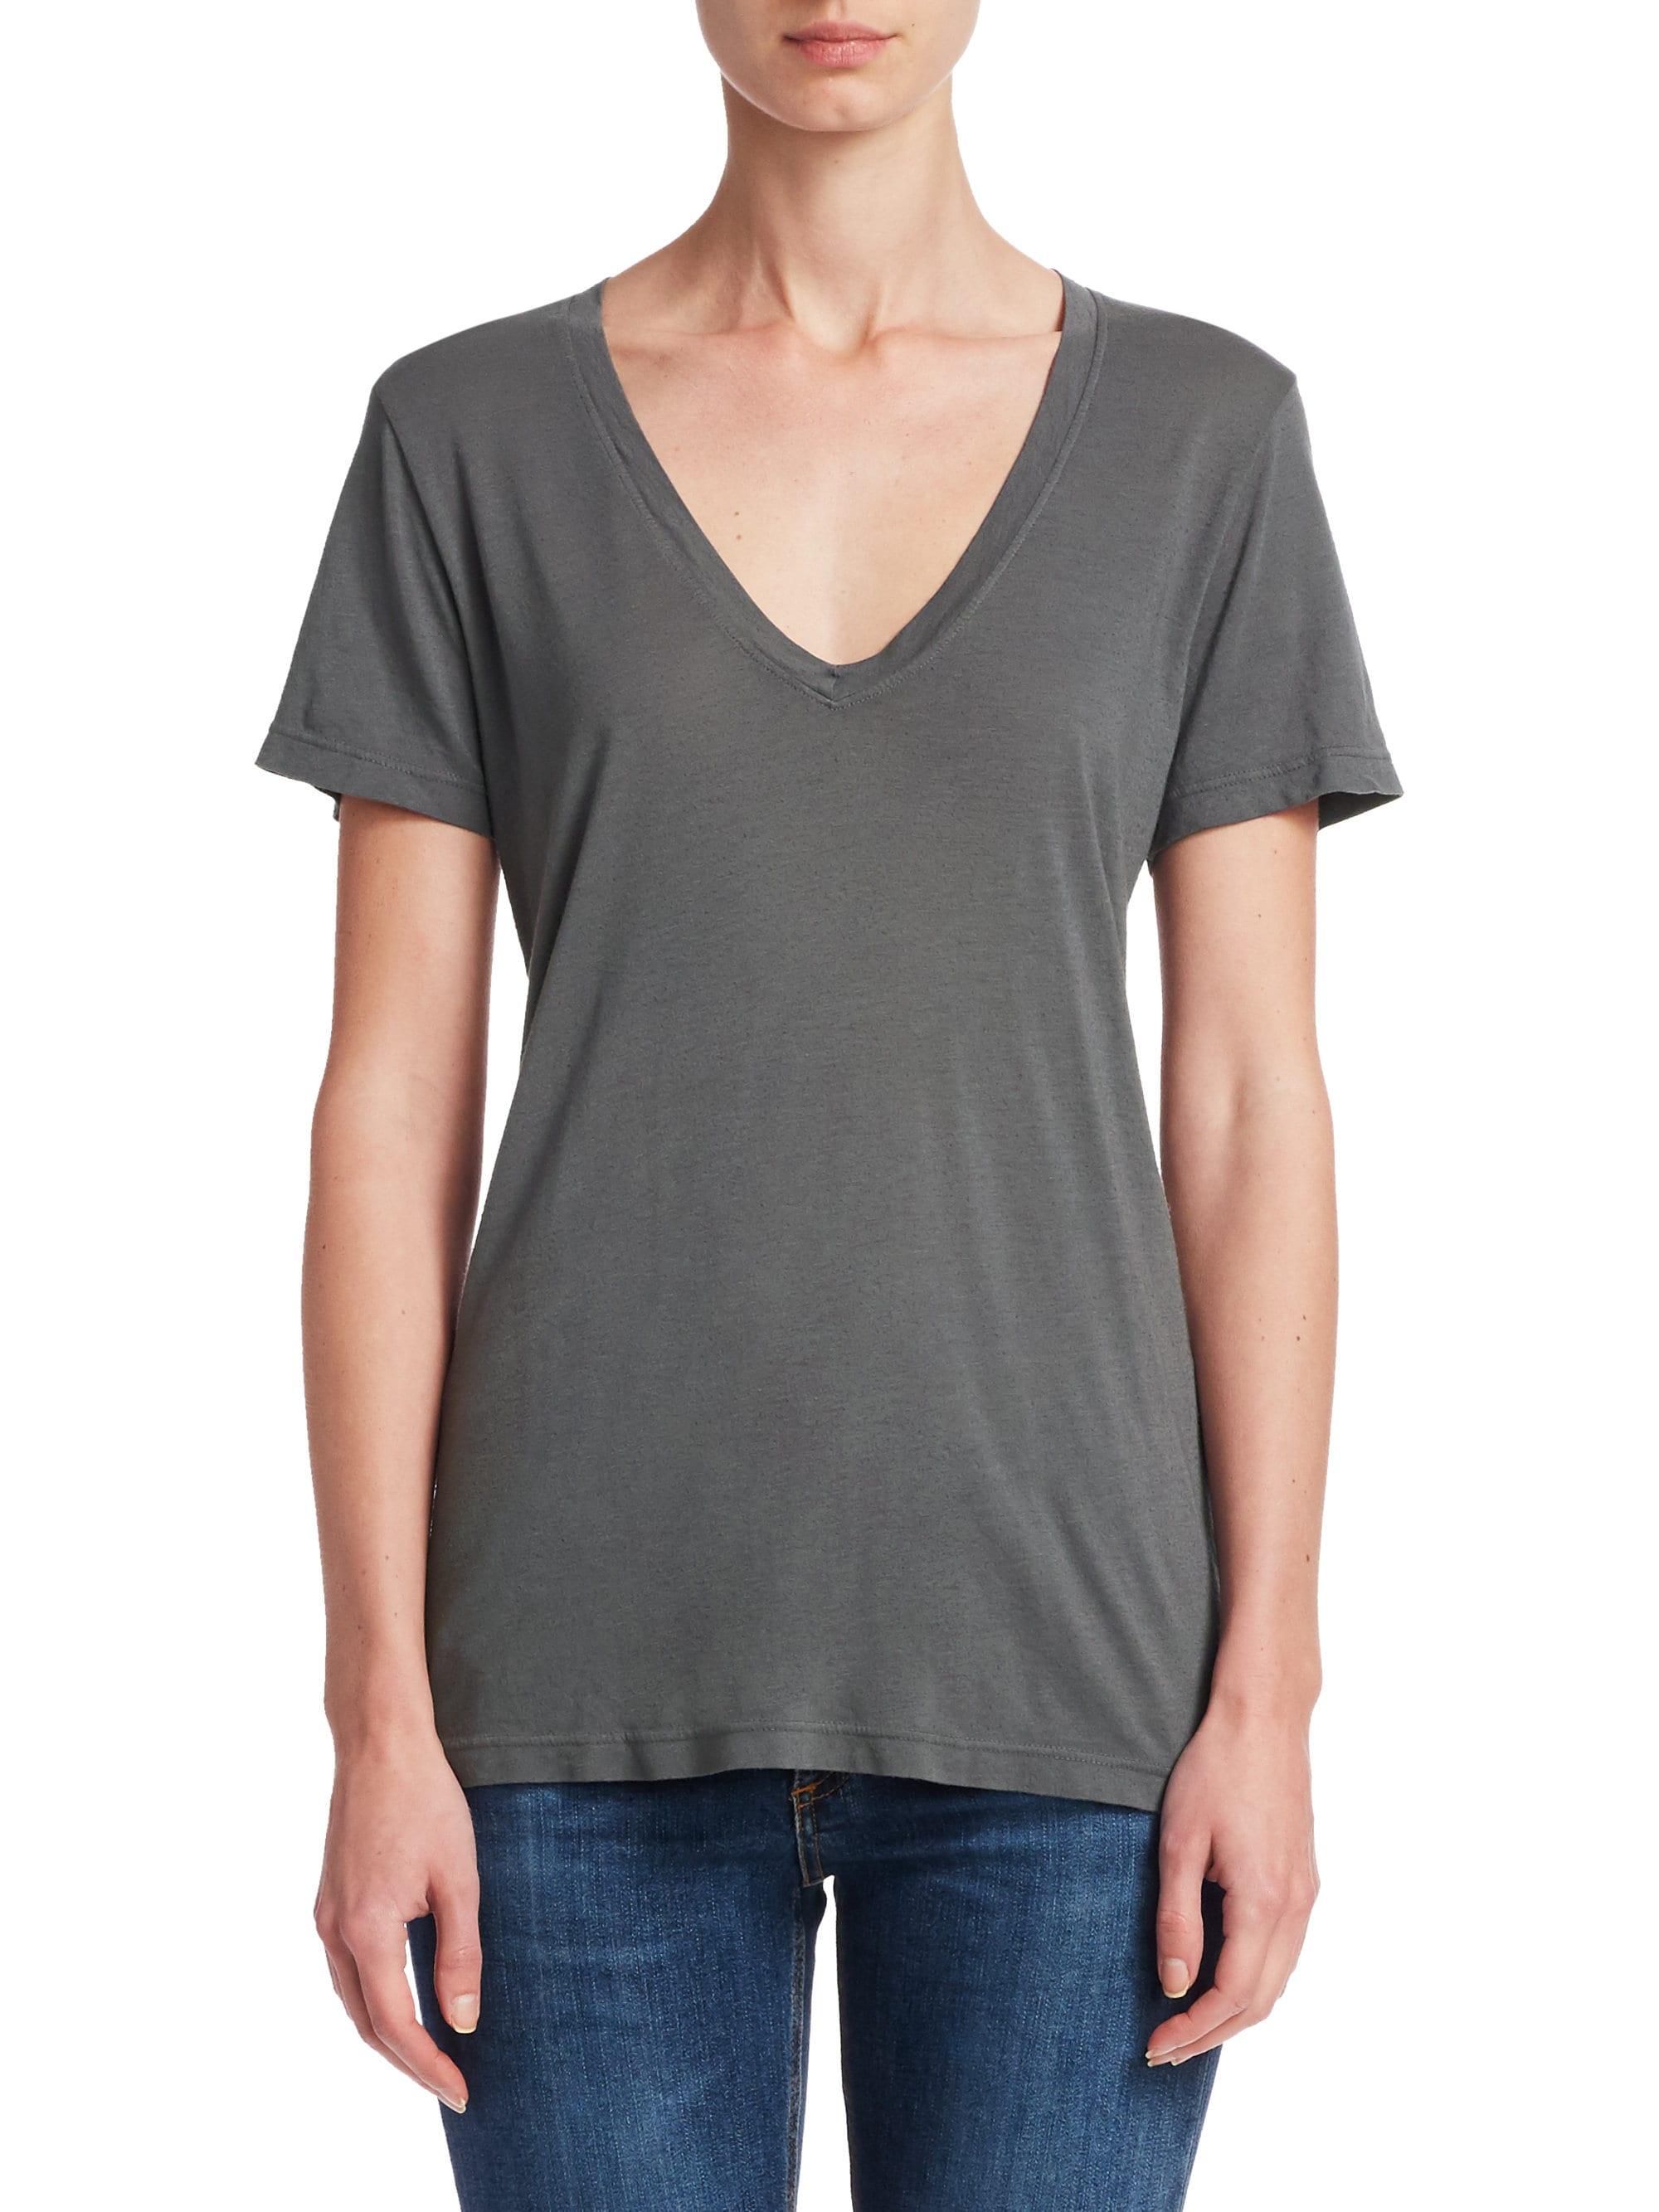 Cotton Citizen Cotton The Classic V-neck Tee in Light Grey (Gray) - Lyst